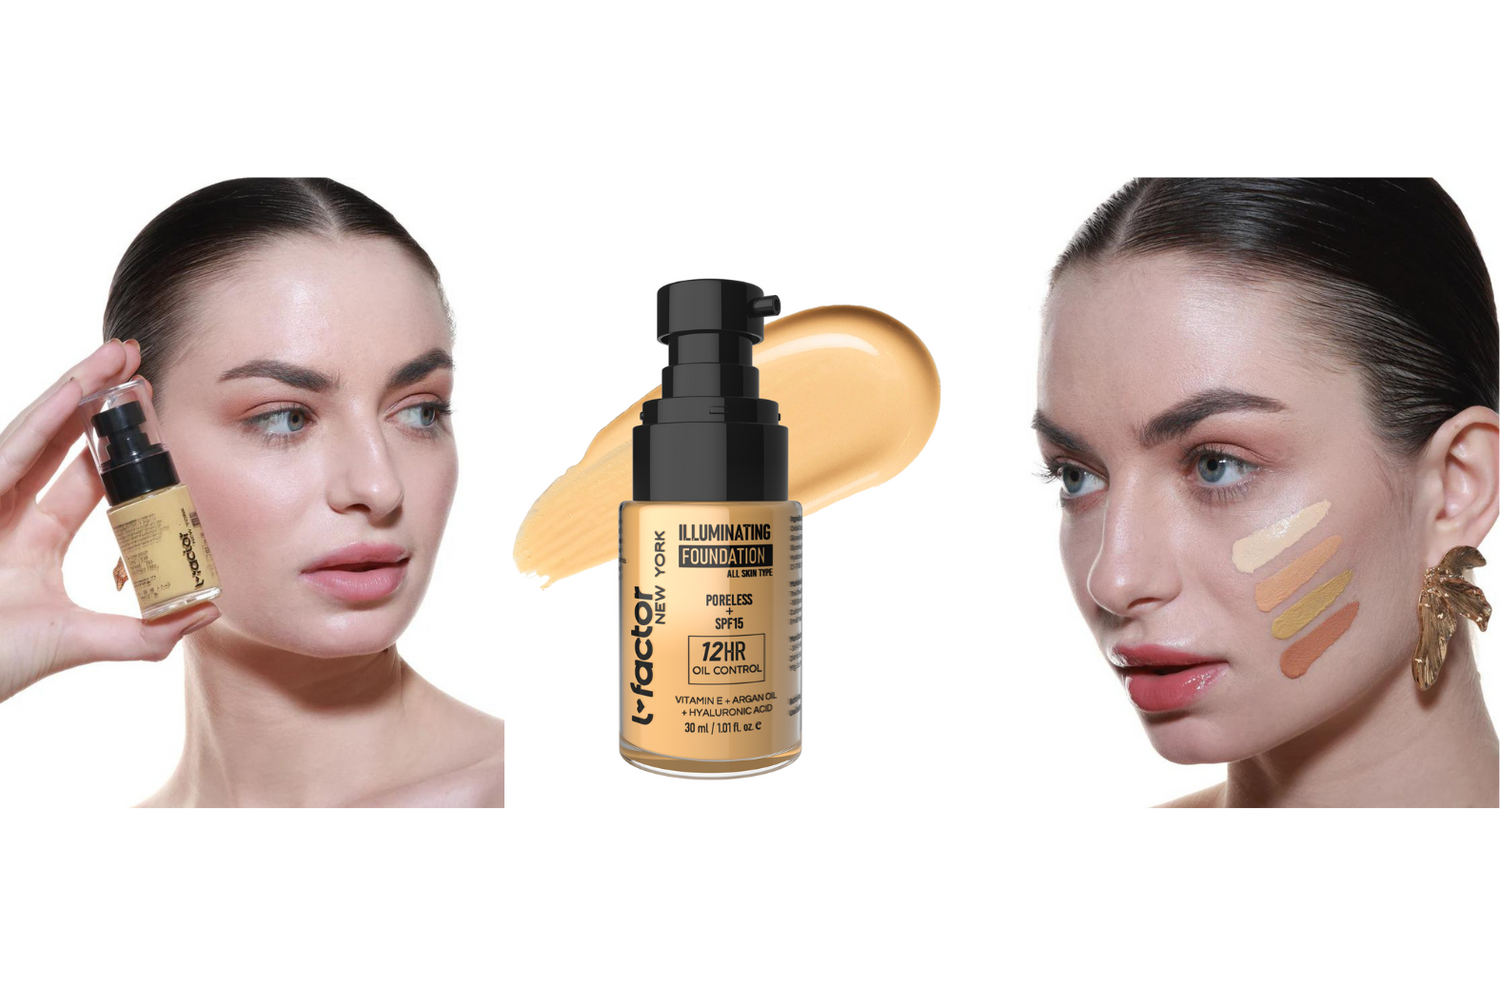 Different Types of Foundation Coverage: Light, Medium, and High